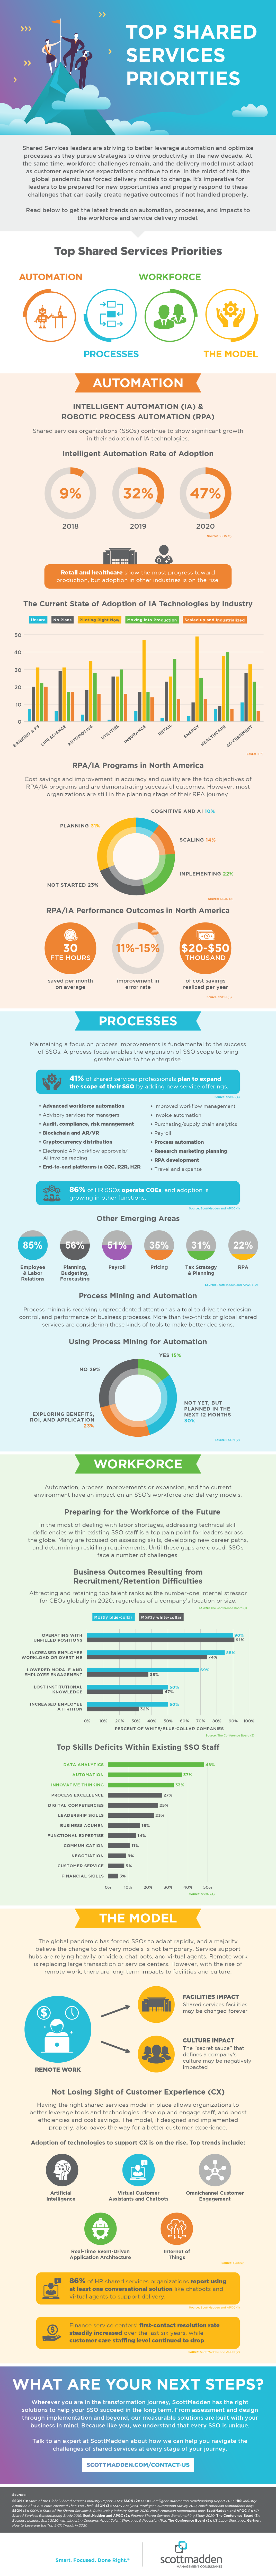 ScottMadden_Top-Shared-Services-Priorities_Infographic